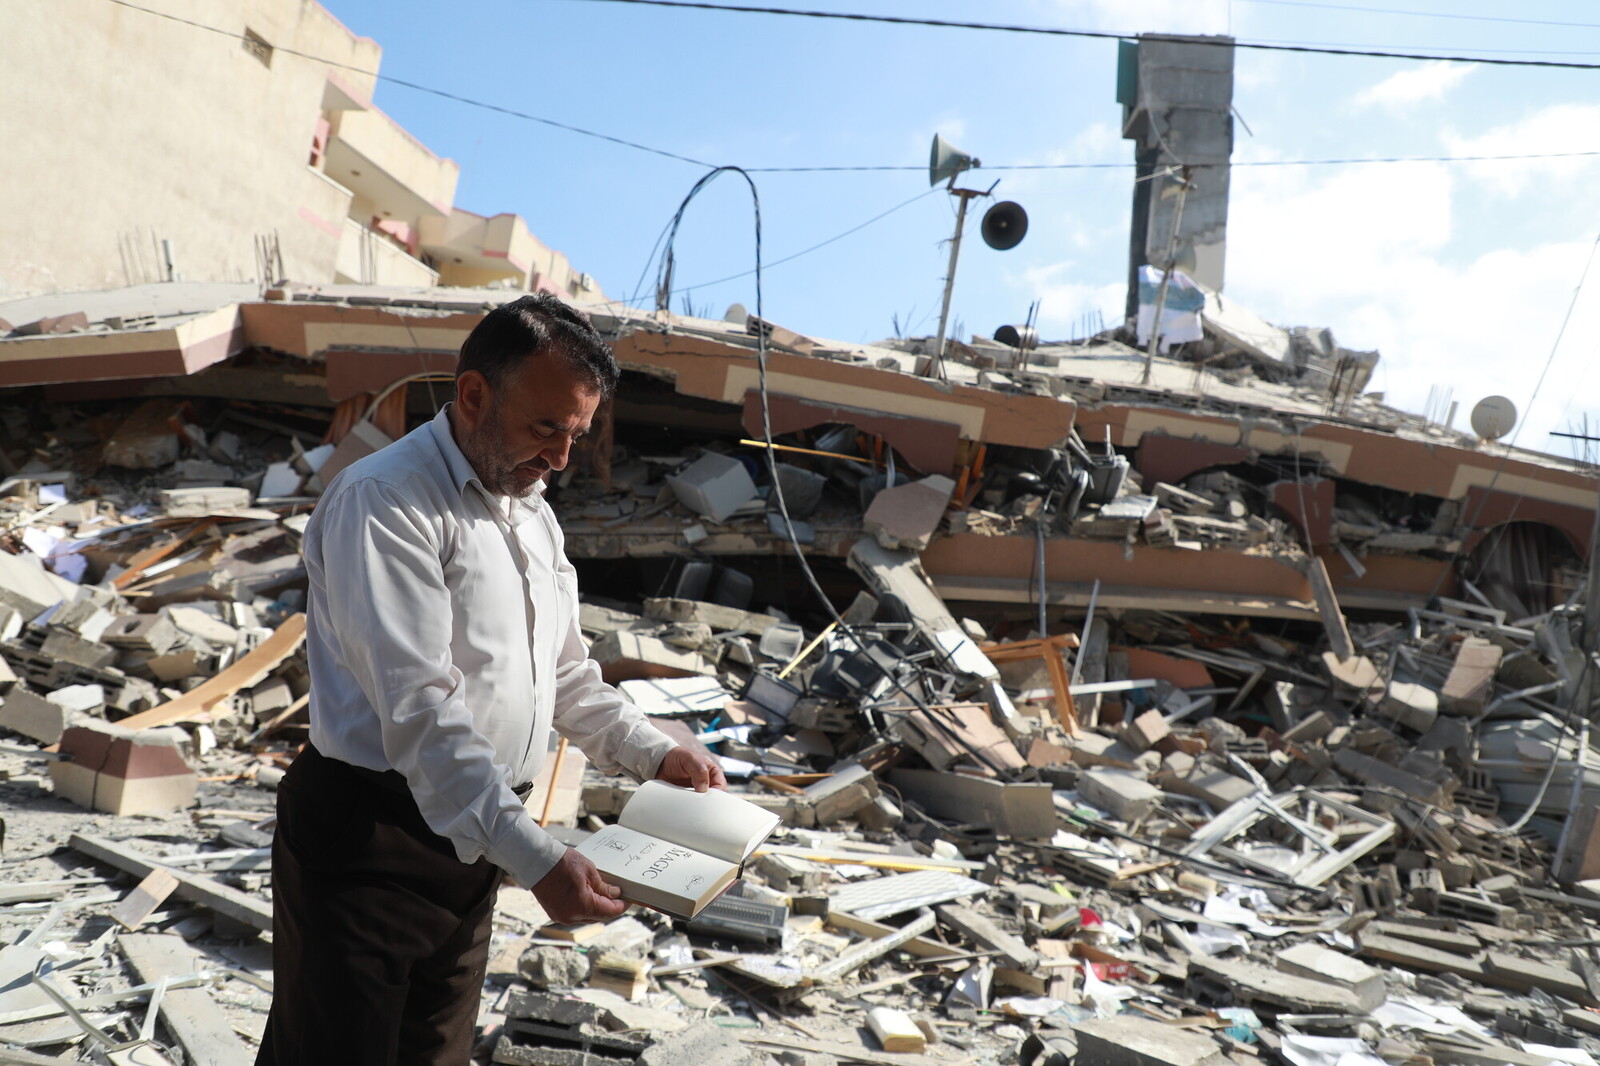 Man looks down at open book amid ruins of a building